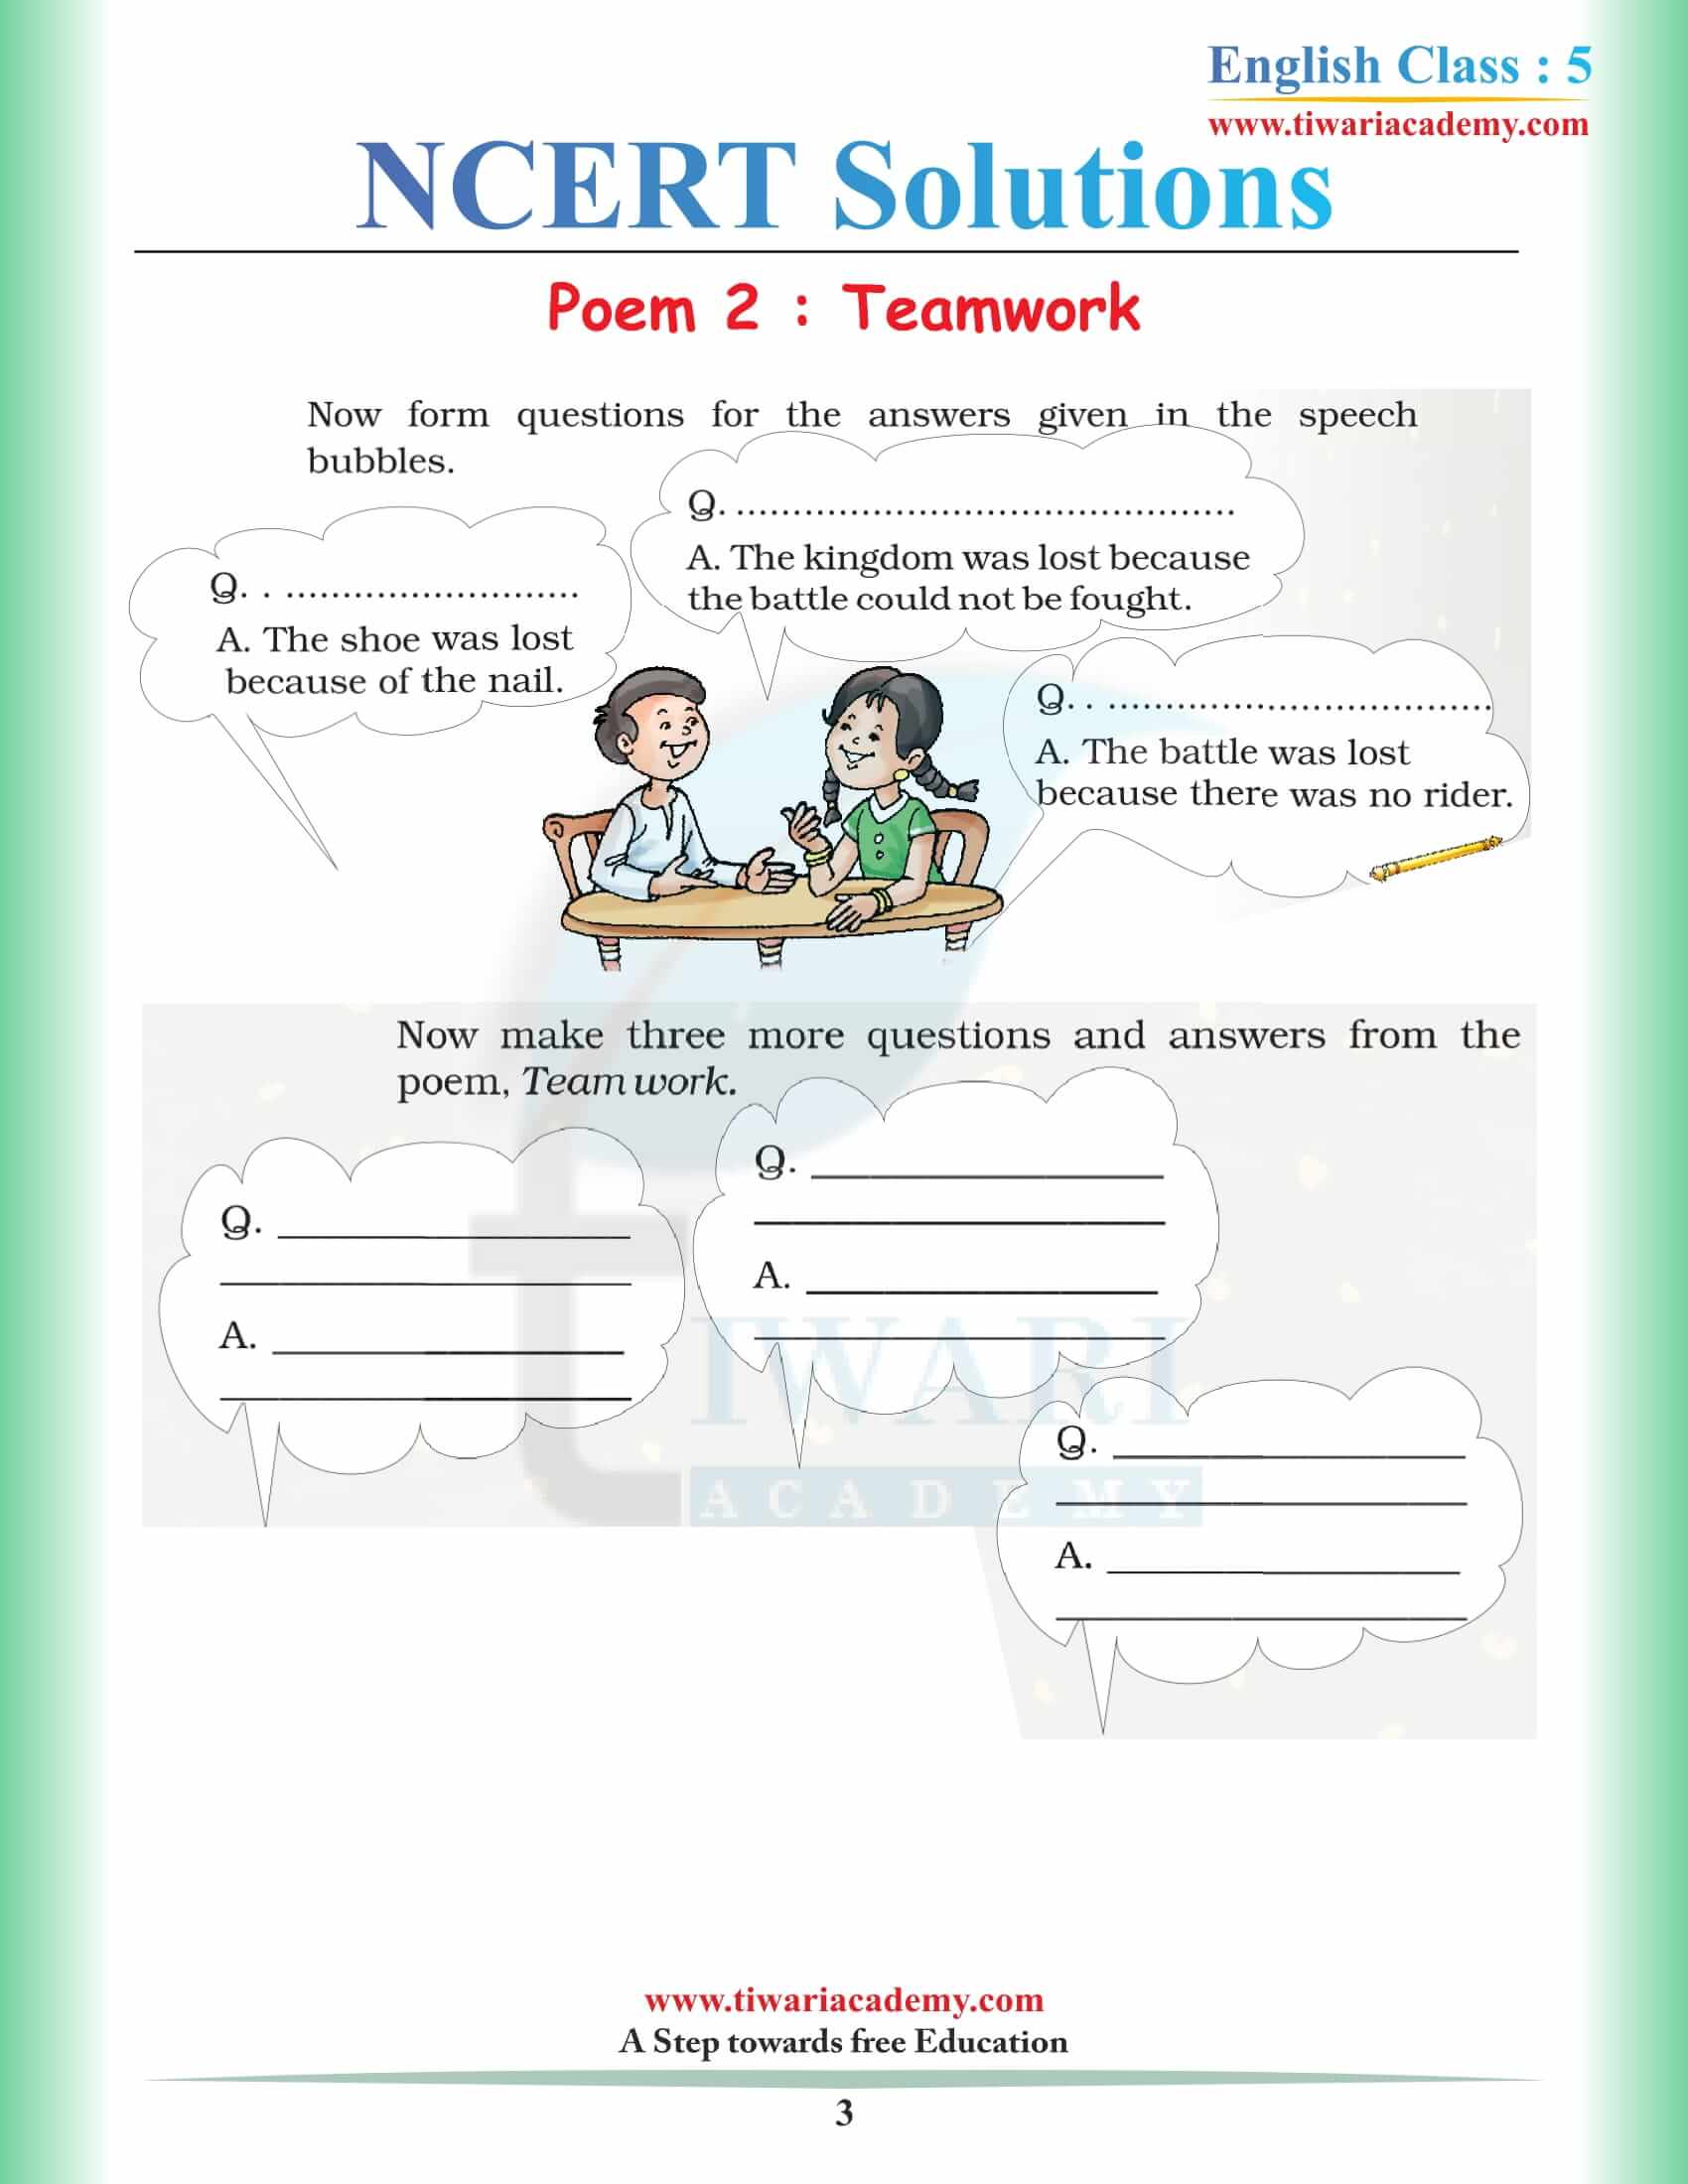 NCERT Solutions for Class 5 English Chapter 2